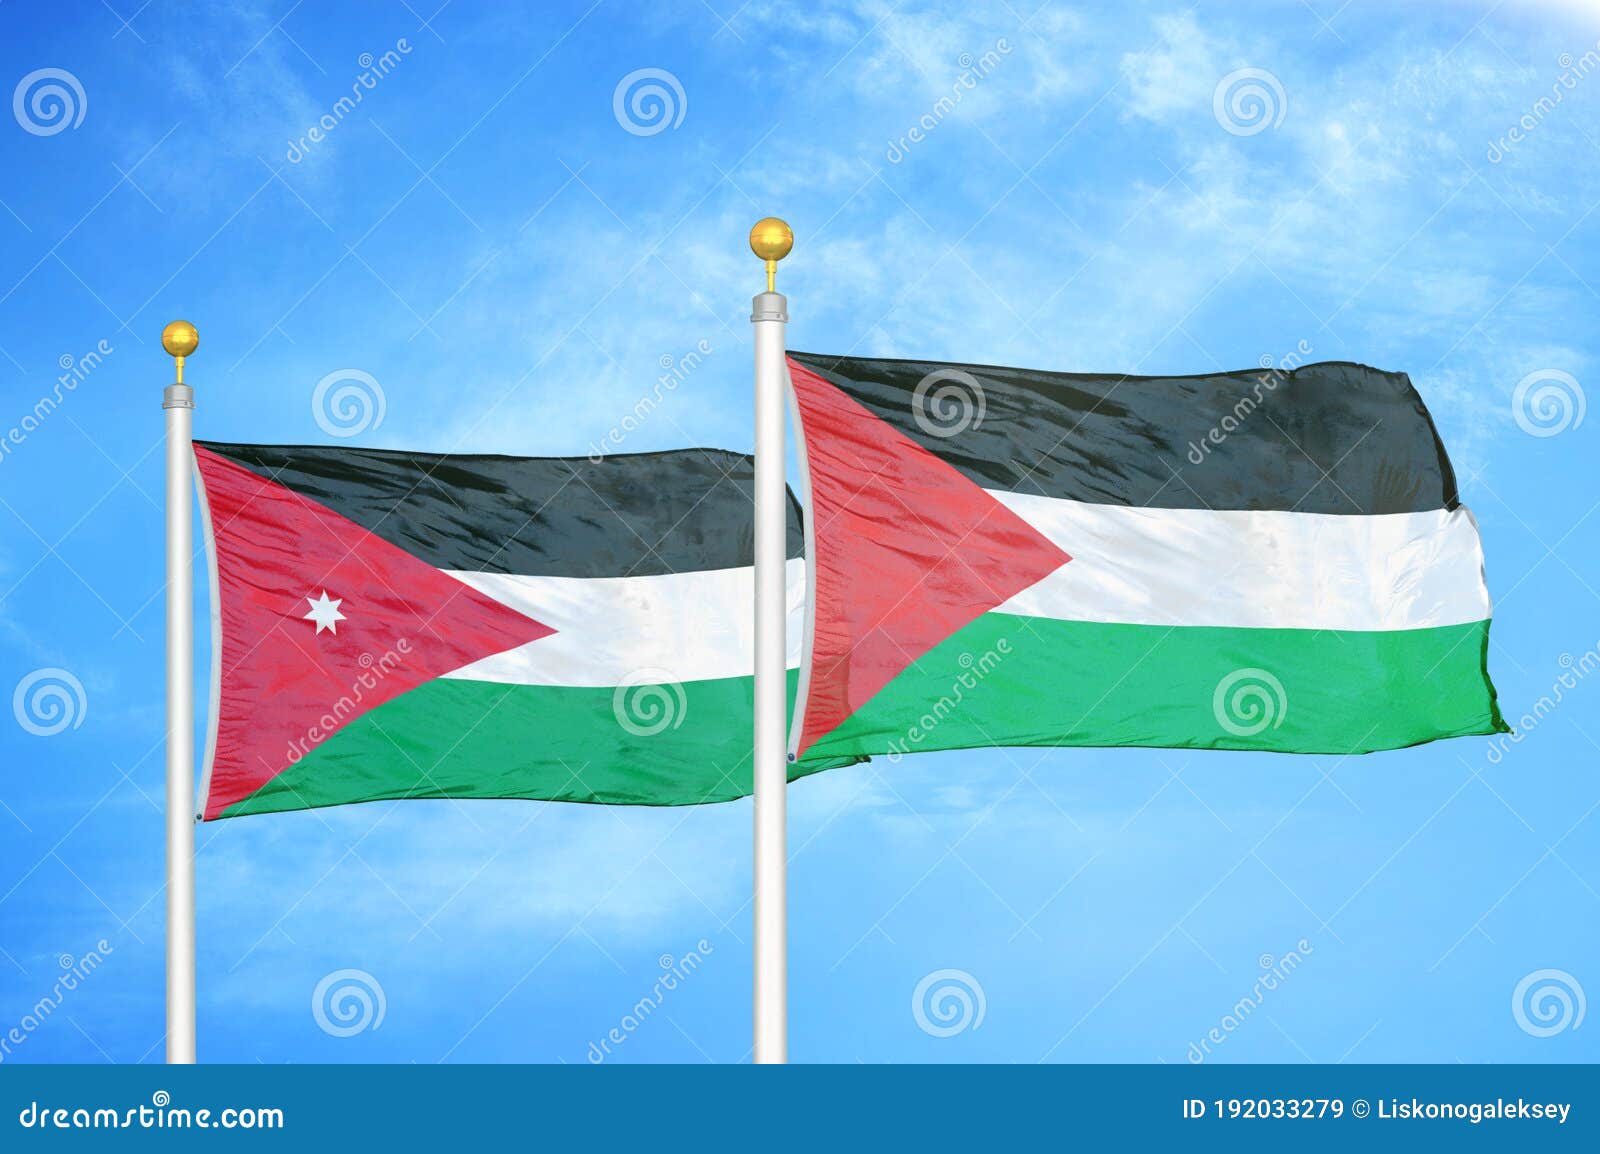 Jordan and Palestine Two Flags on 